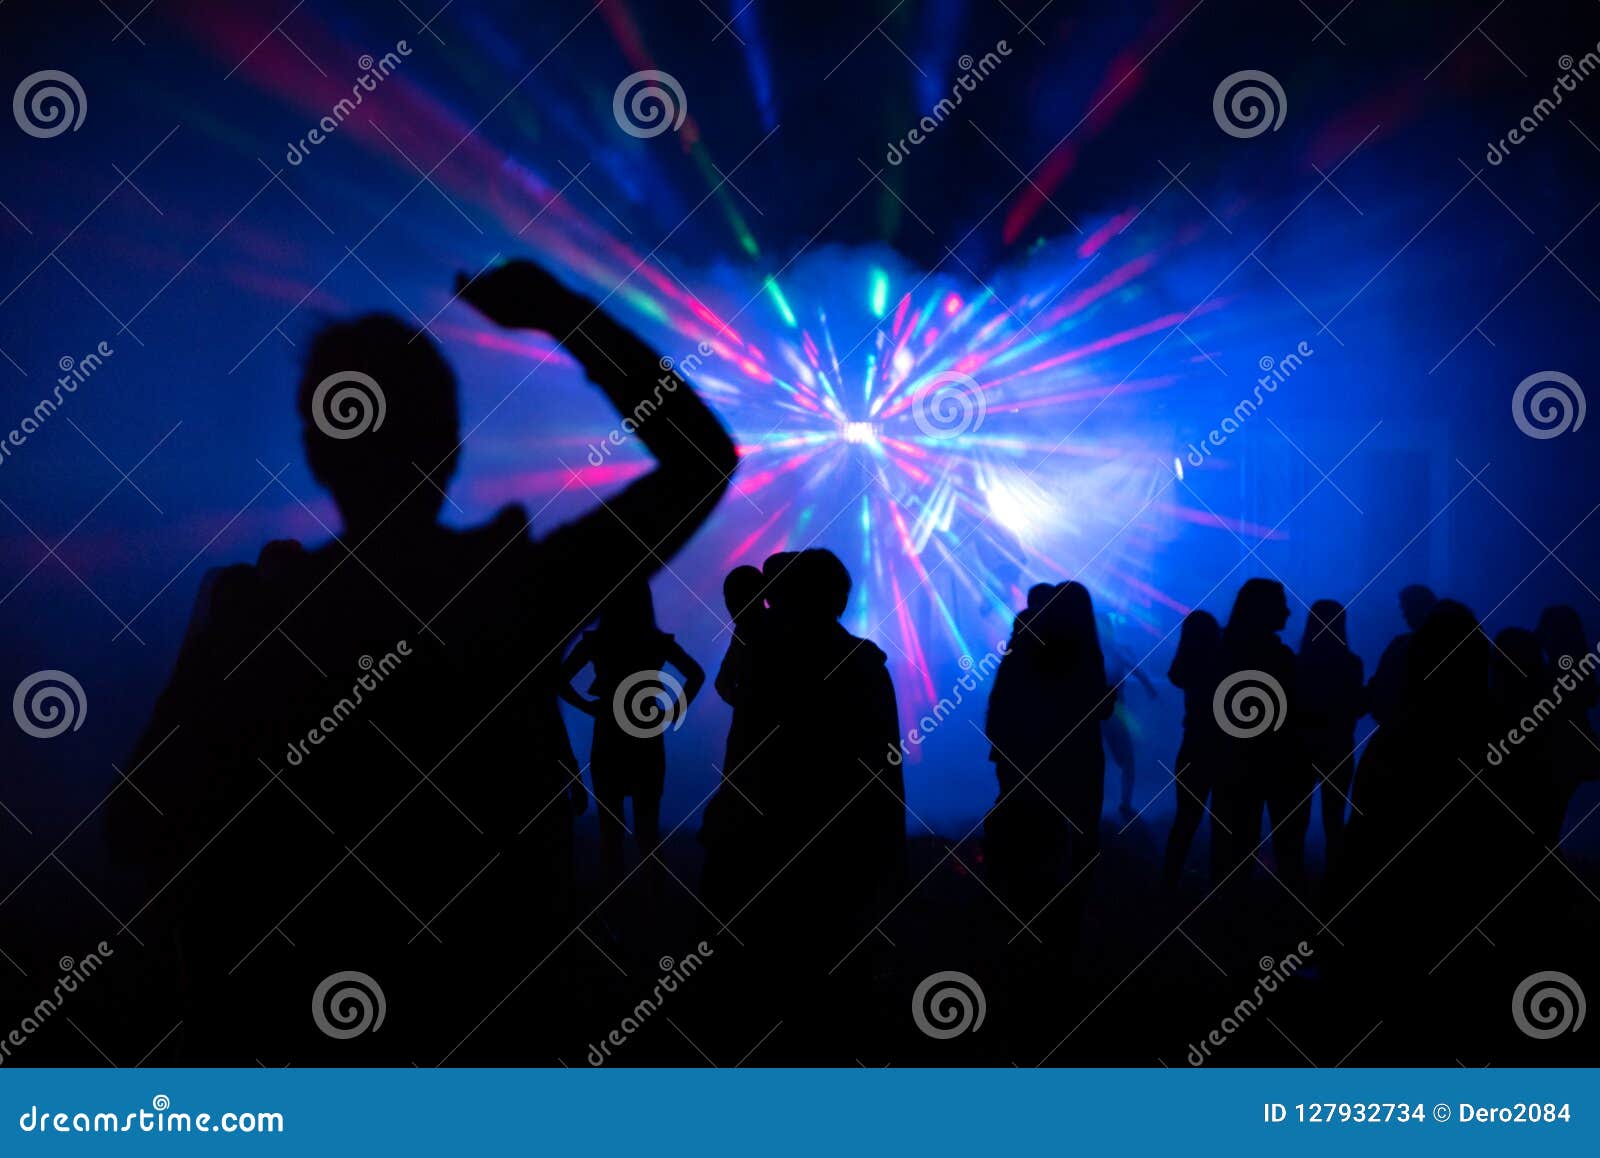 Abstract Blurry Background, Silhouettes of People at Open Air Party ...